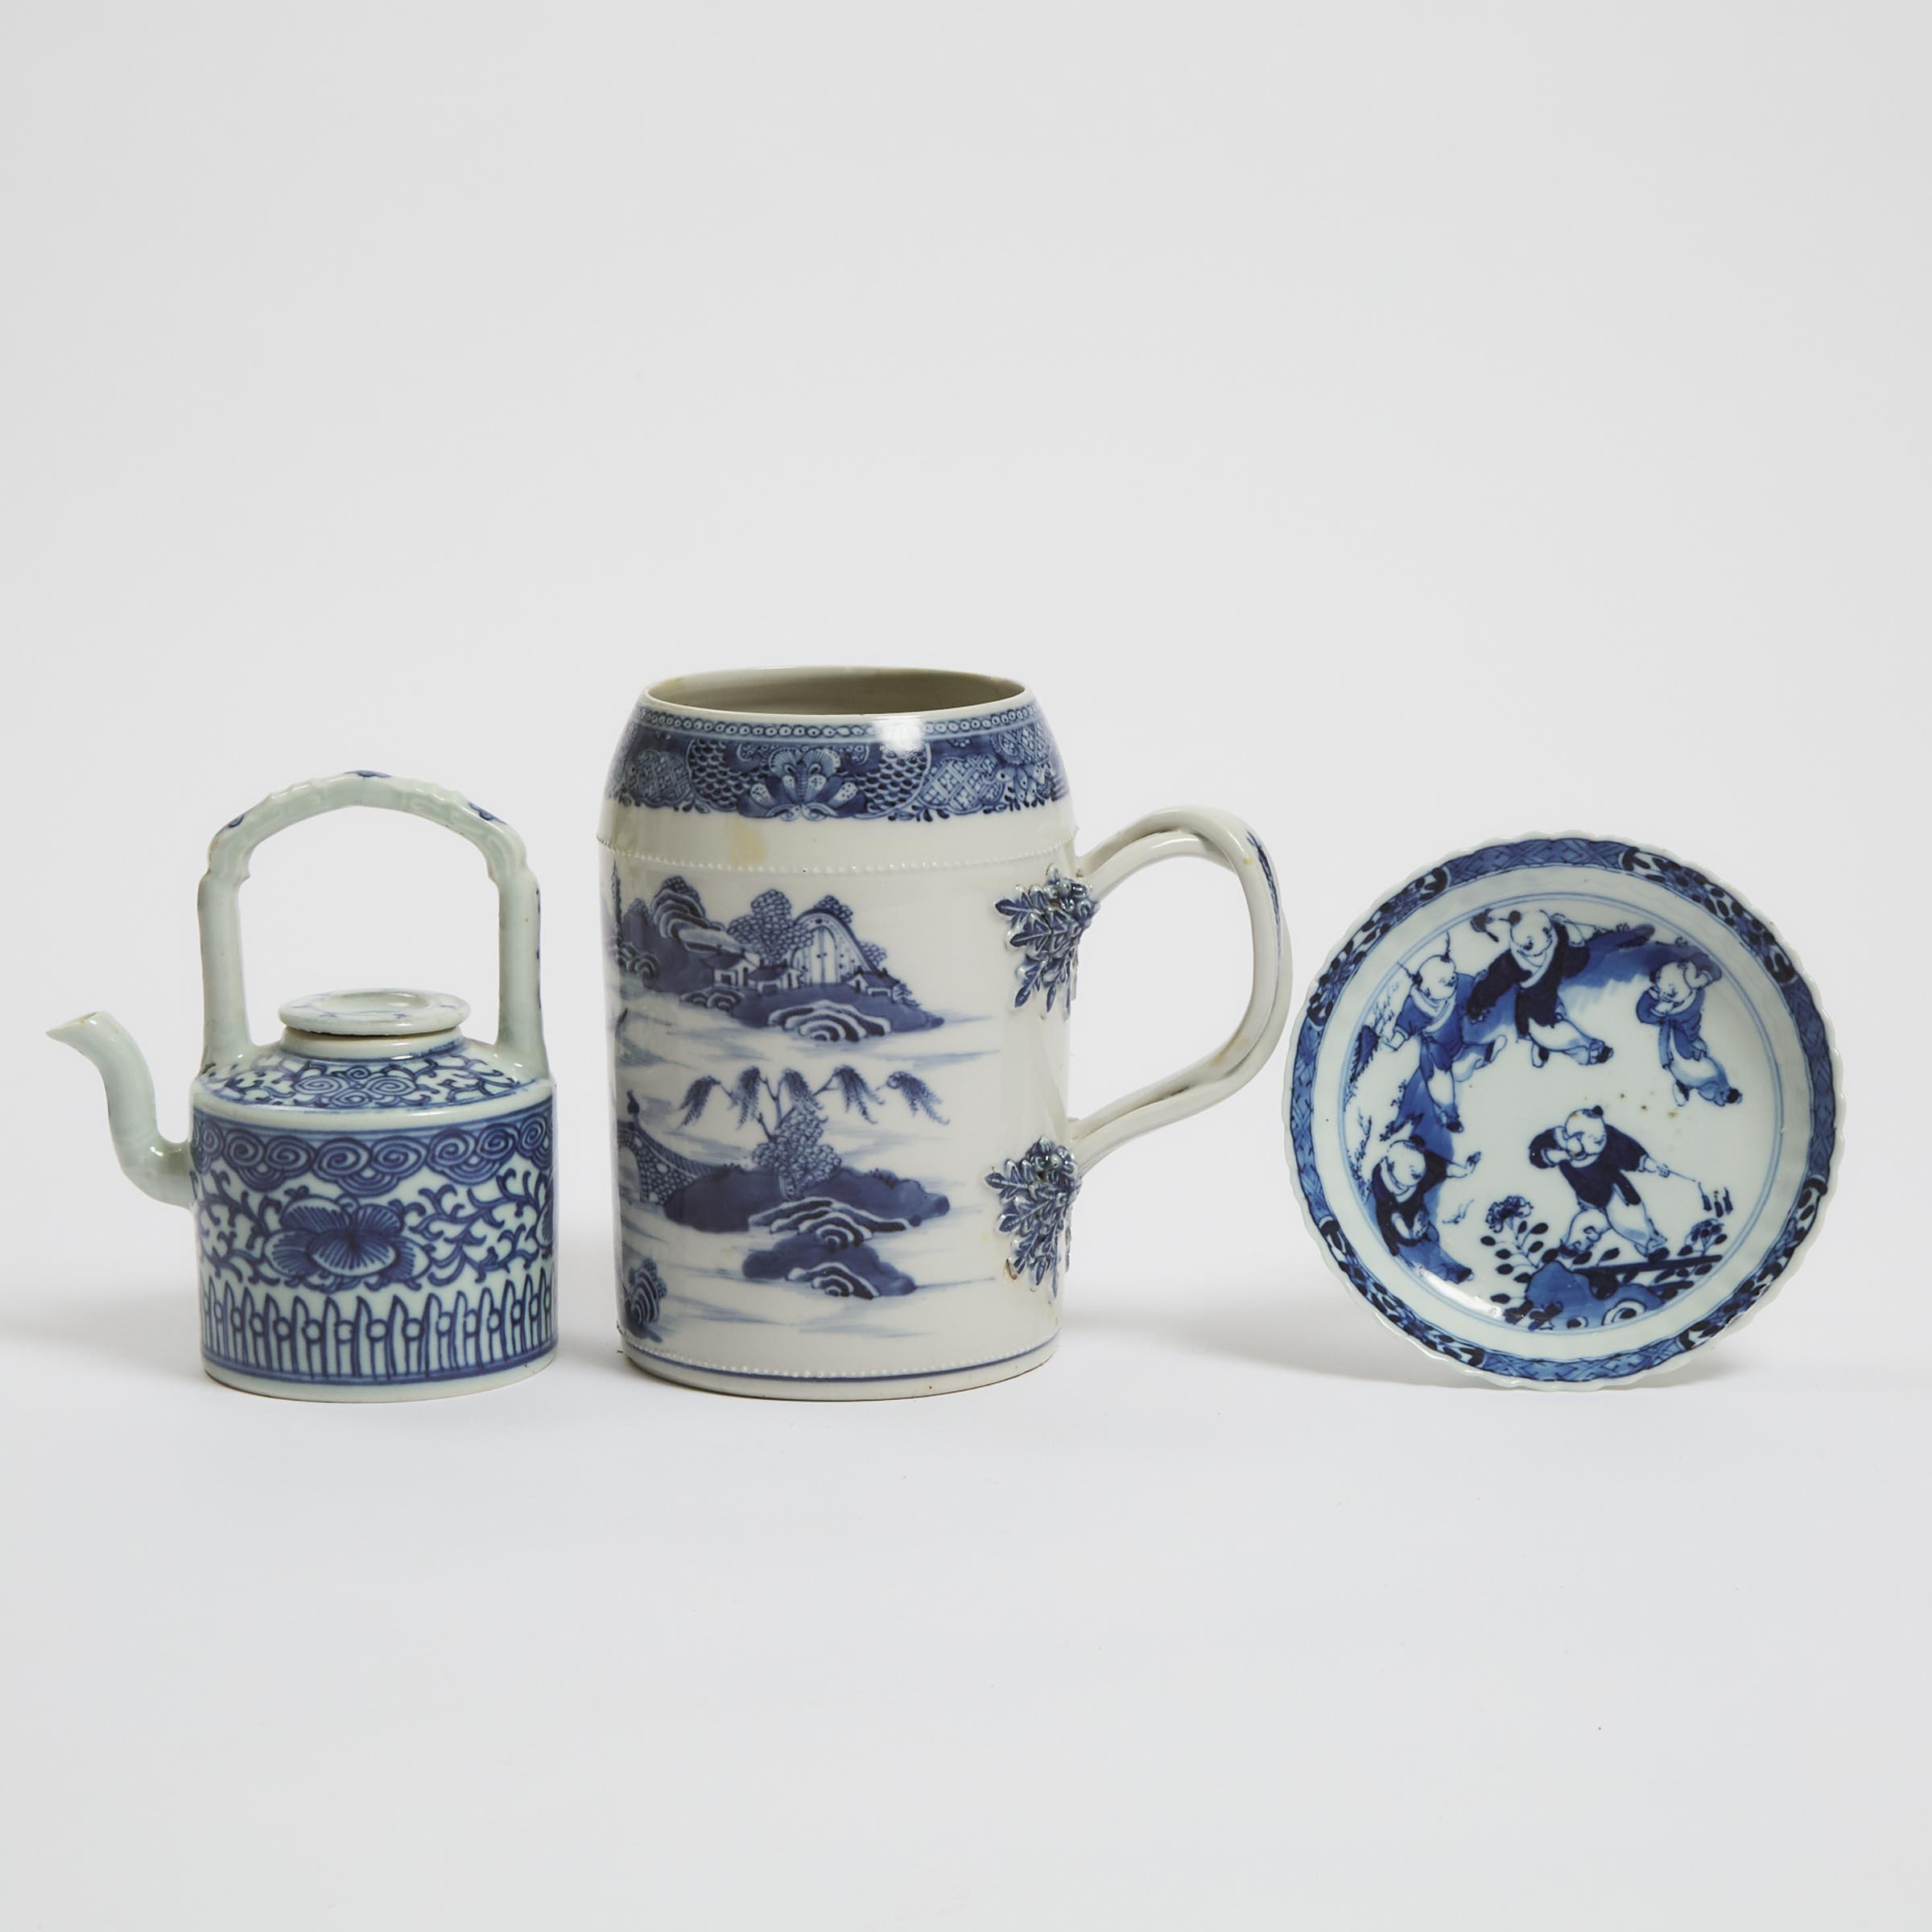 A Group of Three Chinese Export Blue and White Wares, 18th/19th Century